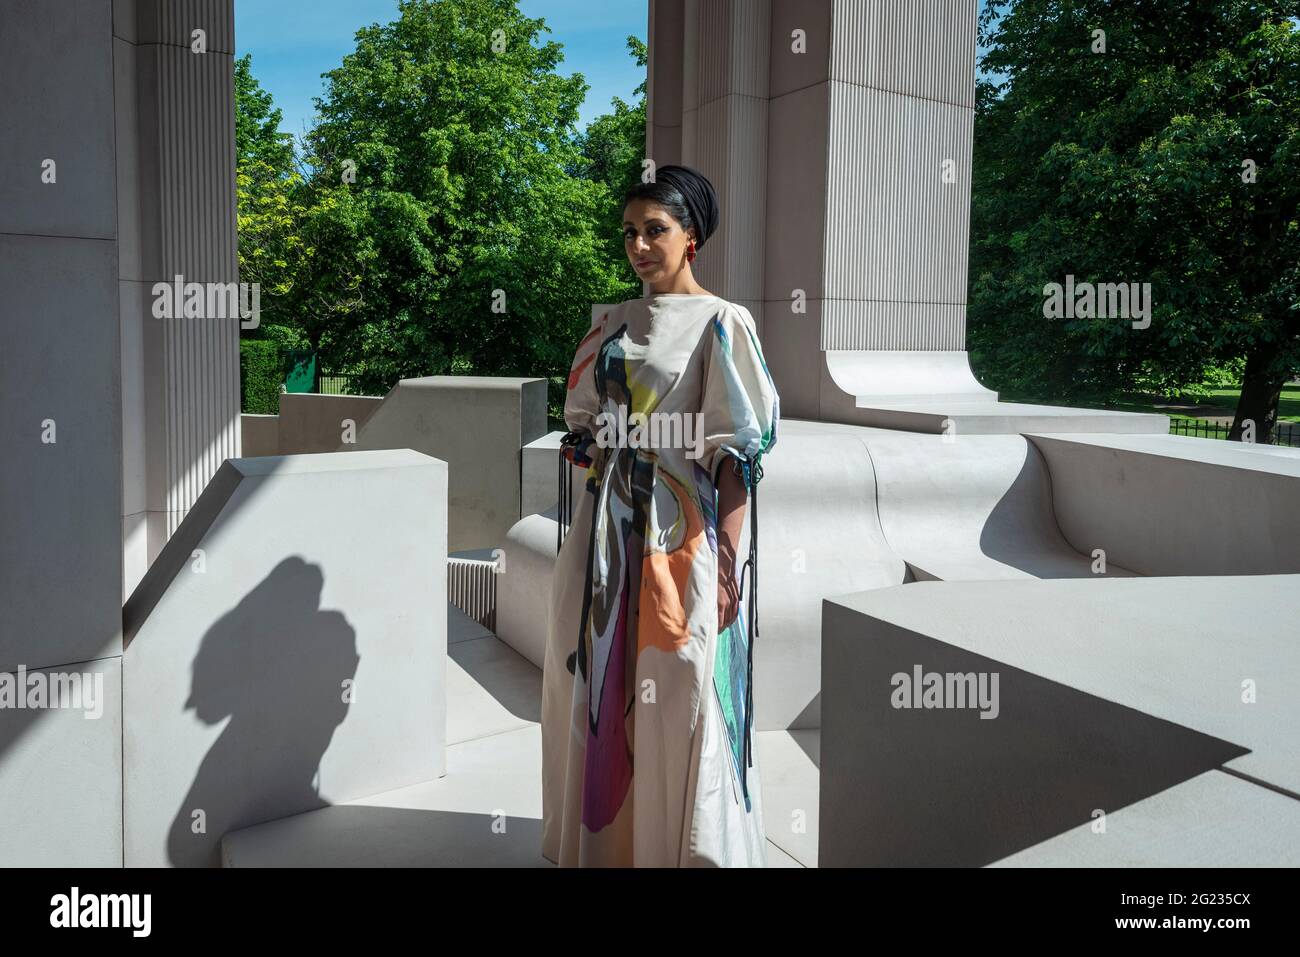 London, UK.  8 June 2021.  Architect Sumayya Vally poses at the unveiling of the 20th Serpentine Pavilion in Kensington Gardens. It is designed by Johannesburg-based practice Counterspace and directed by Vally, who is the youngest architect to be commissioned for this internationally renowned architecture programme.  The design references the architecture in migrant communities in some of London’s neighbourhoods and is on display 11 June to 17 October.   Credit: Stephen Chung / Alamy Live News Stock Photo